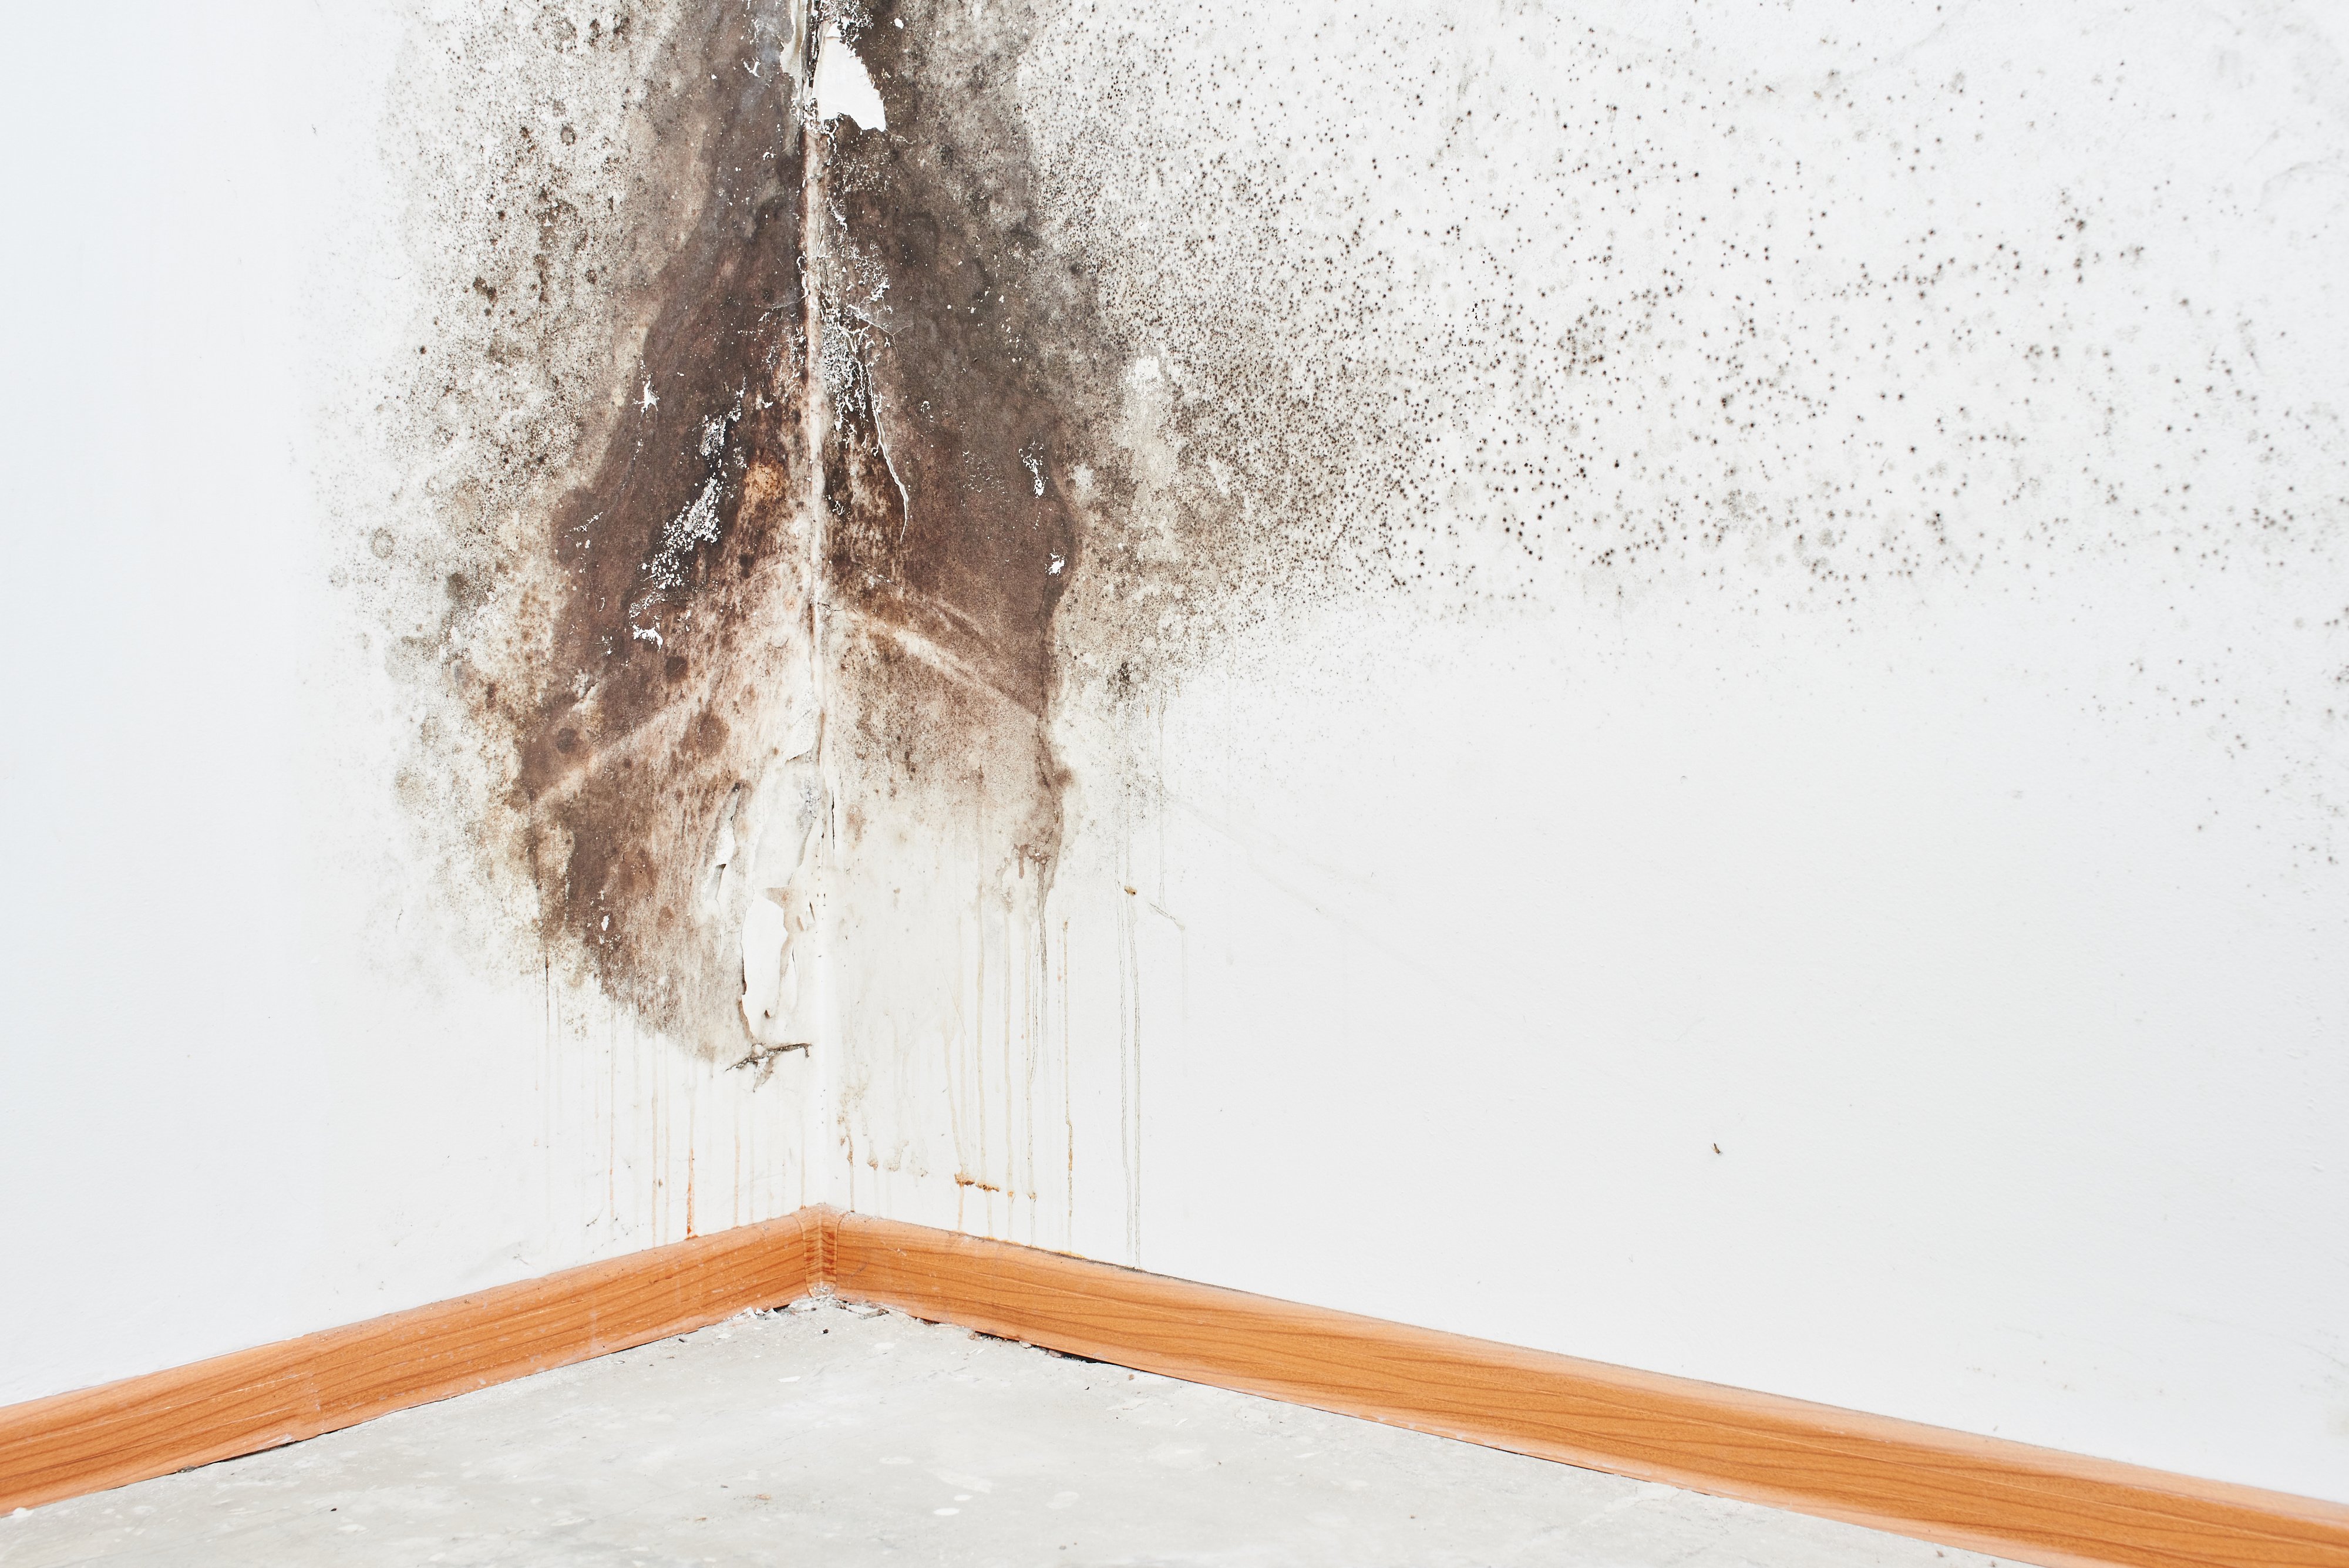 Mold. Aspergillus. Black fungus on a white wall in a corner on the ceiling.